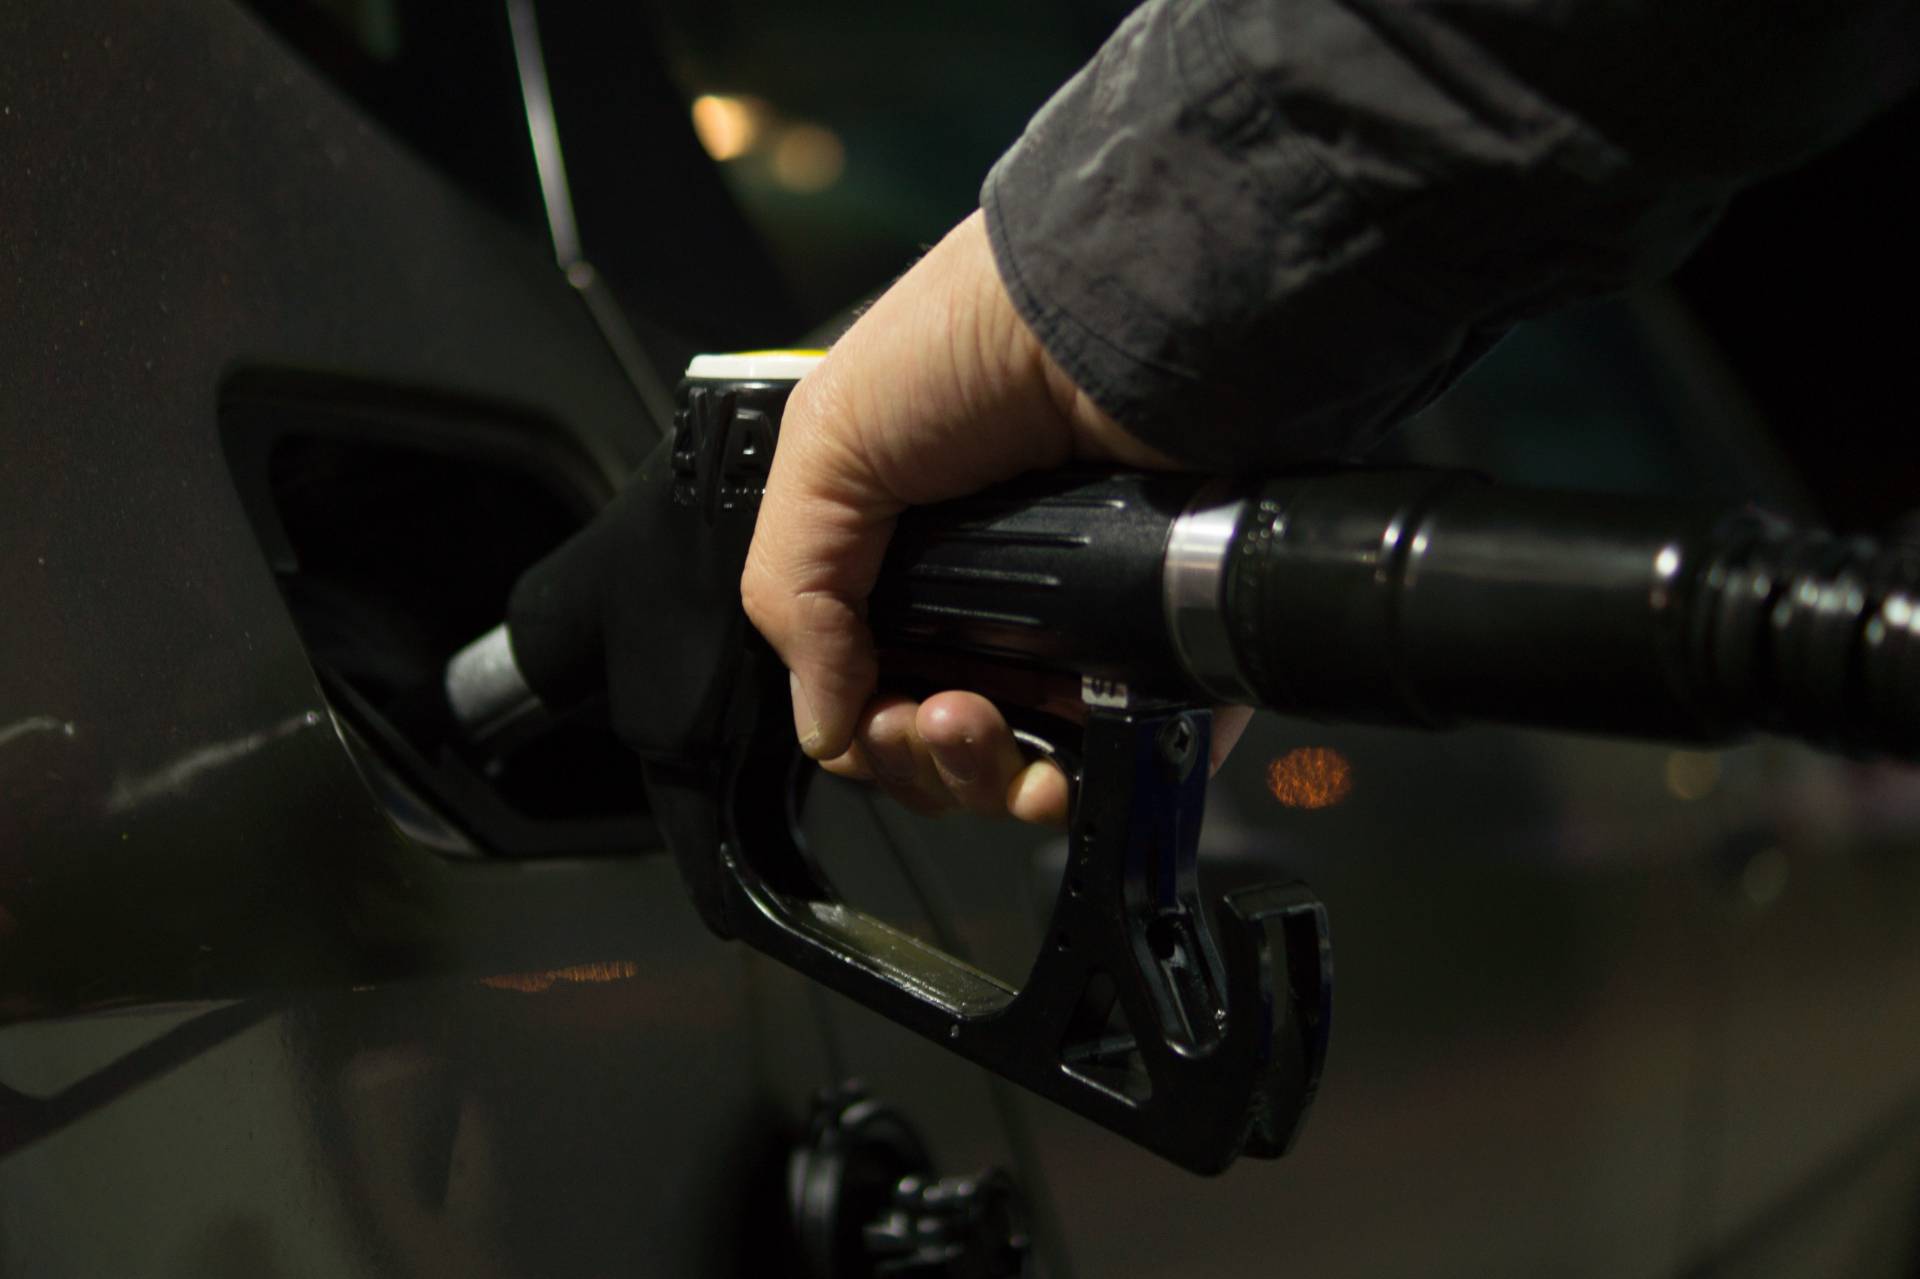 Panic buying leads to fuel shortages across the UK